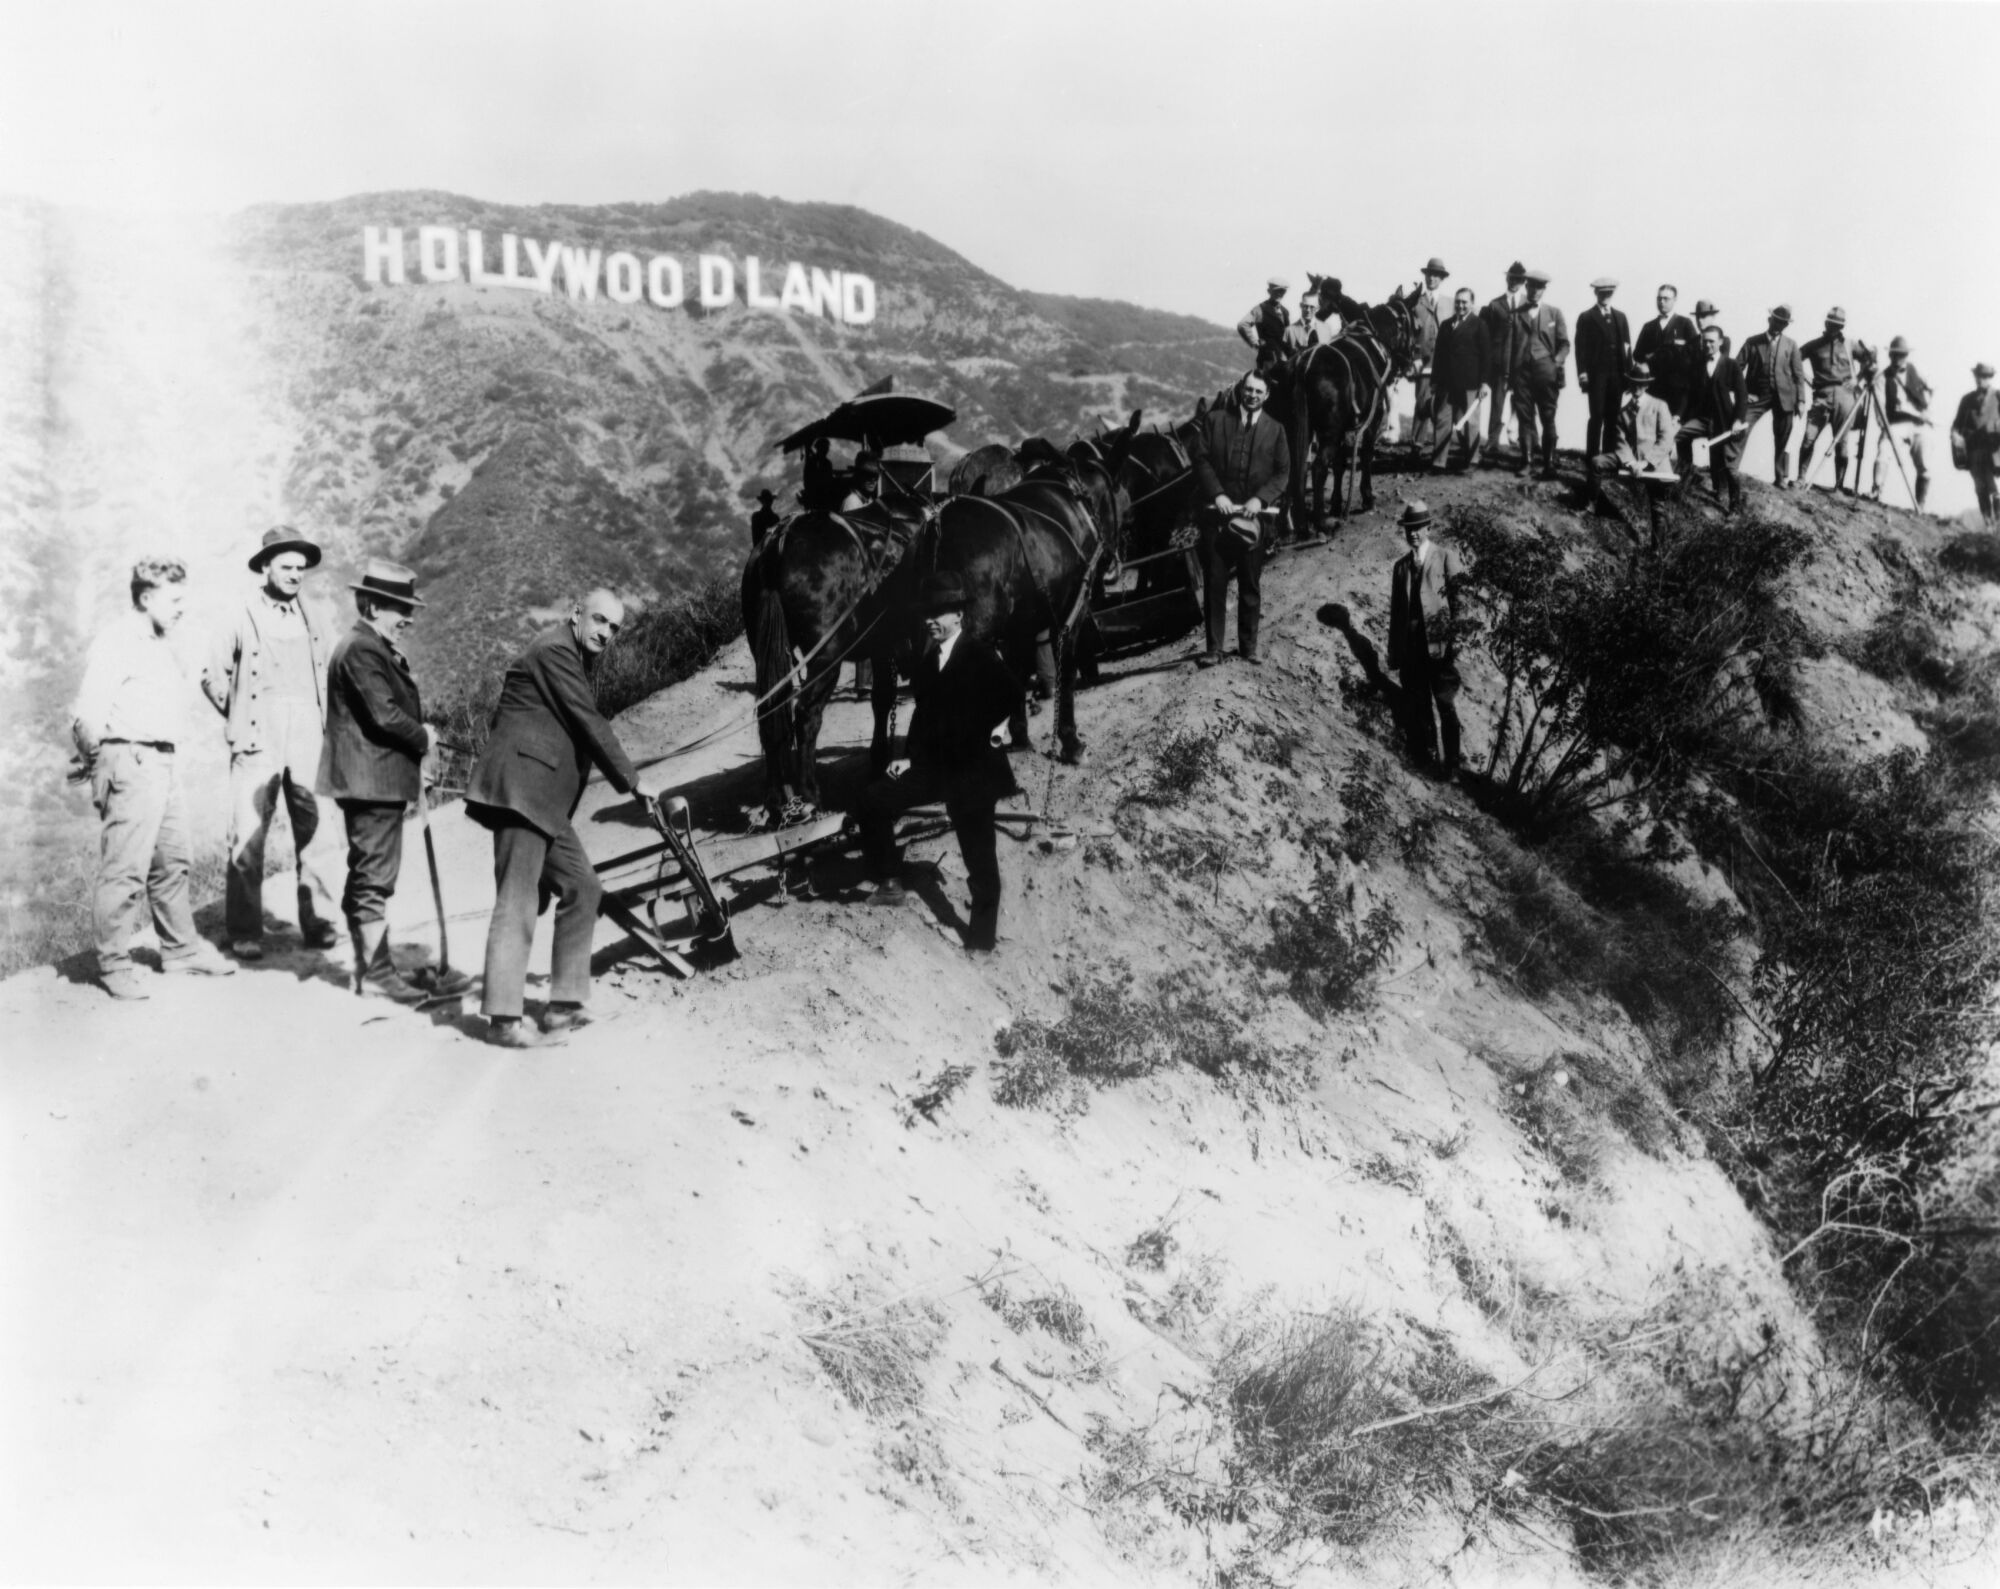 A group of men and pack animals on a hill with the "Hollywoodland" sign in the distance